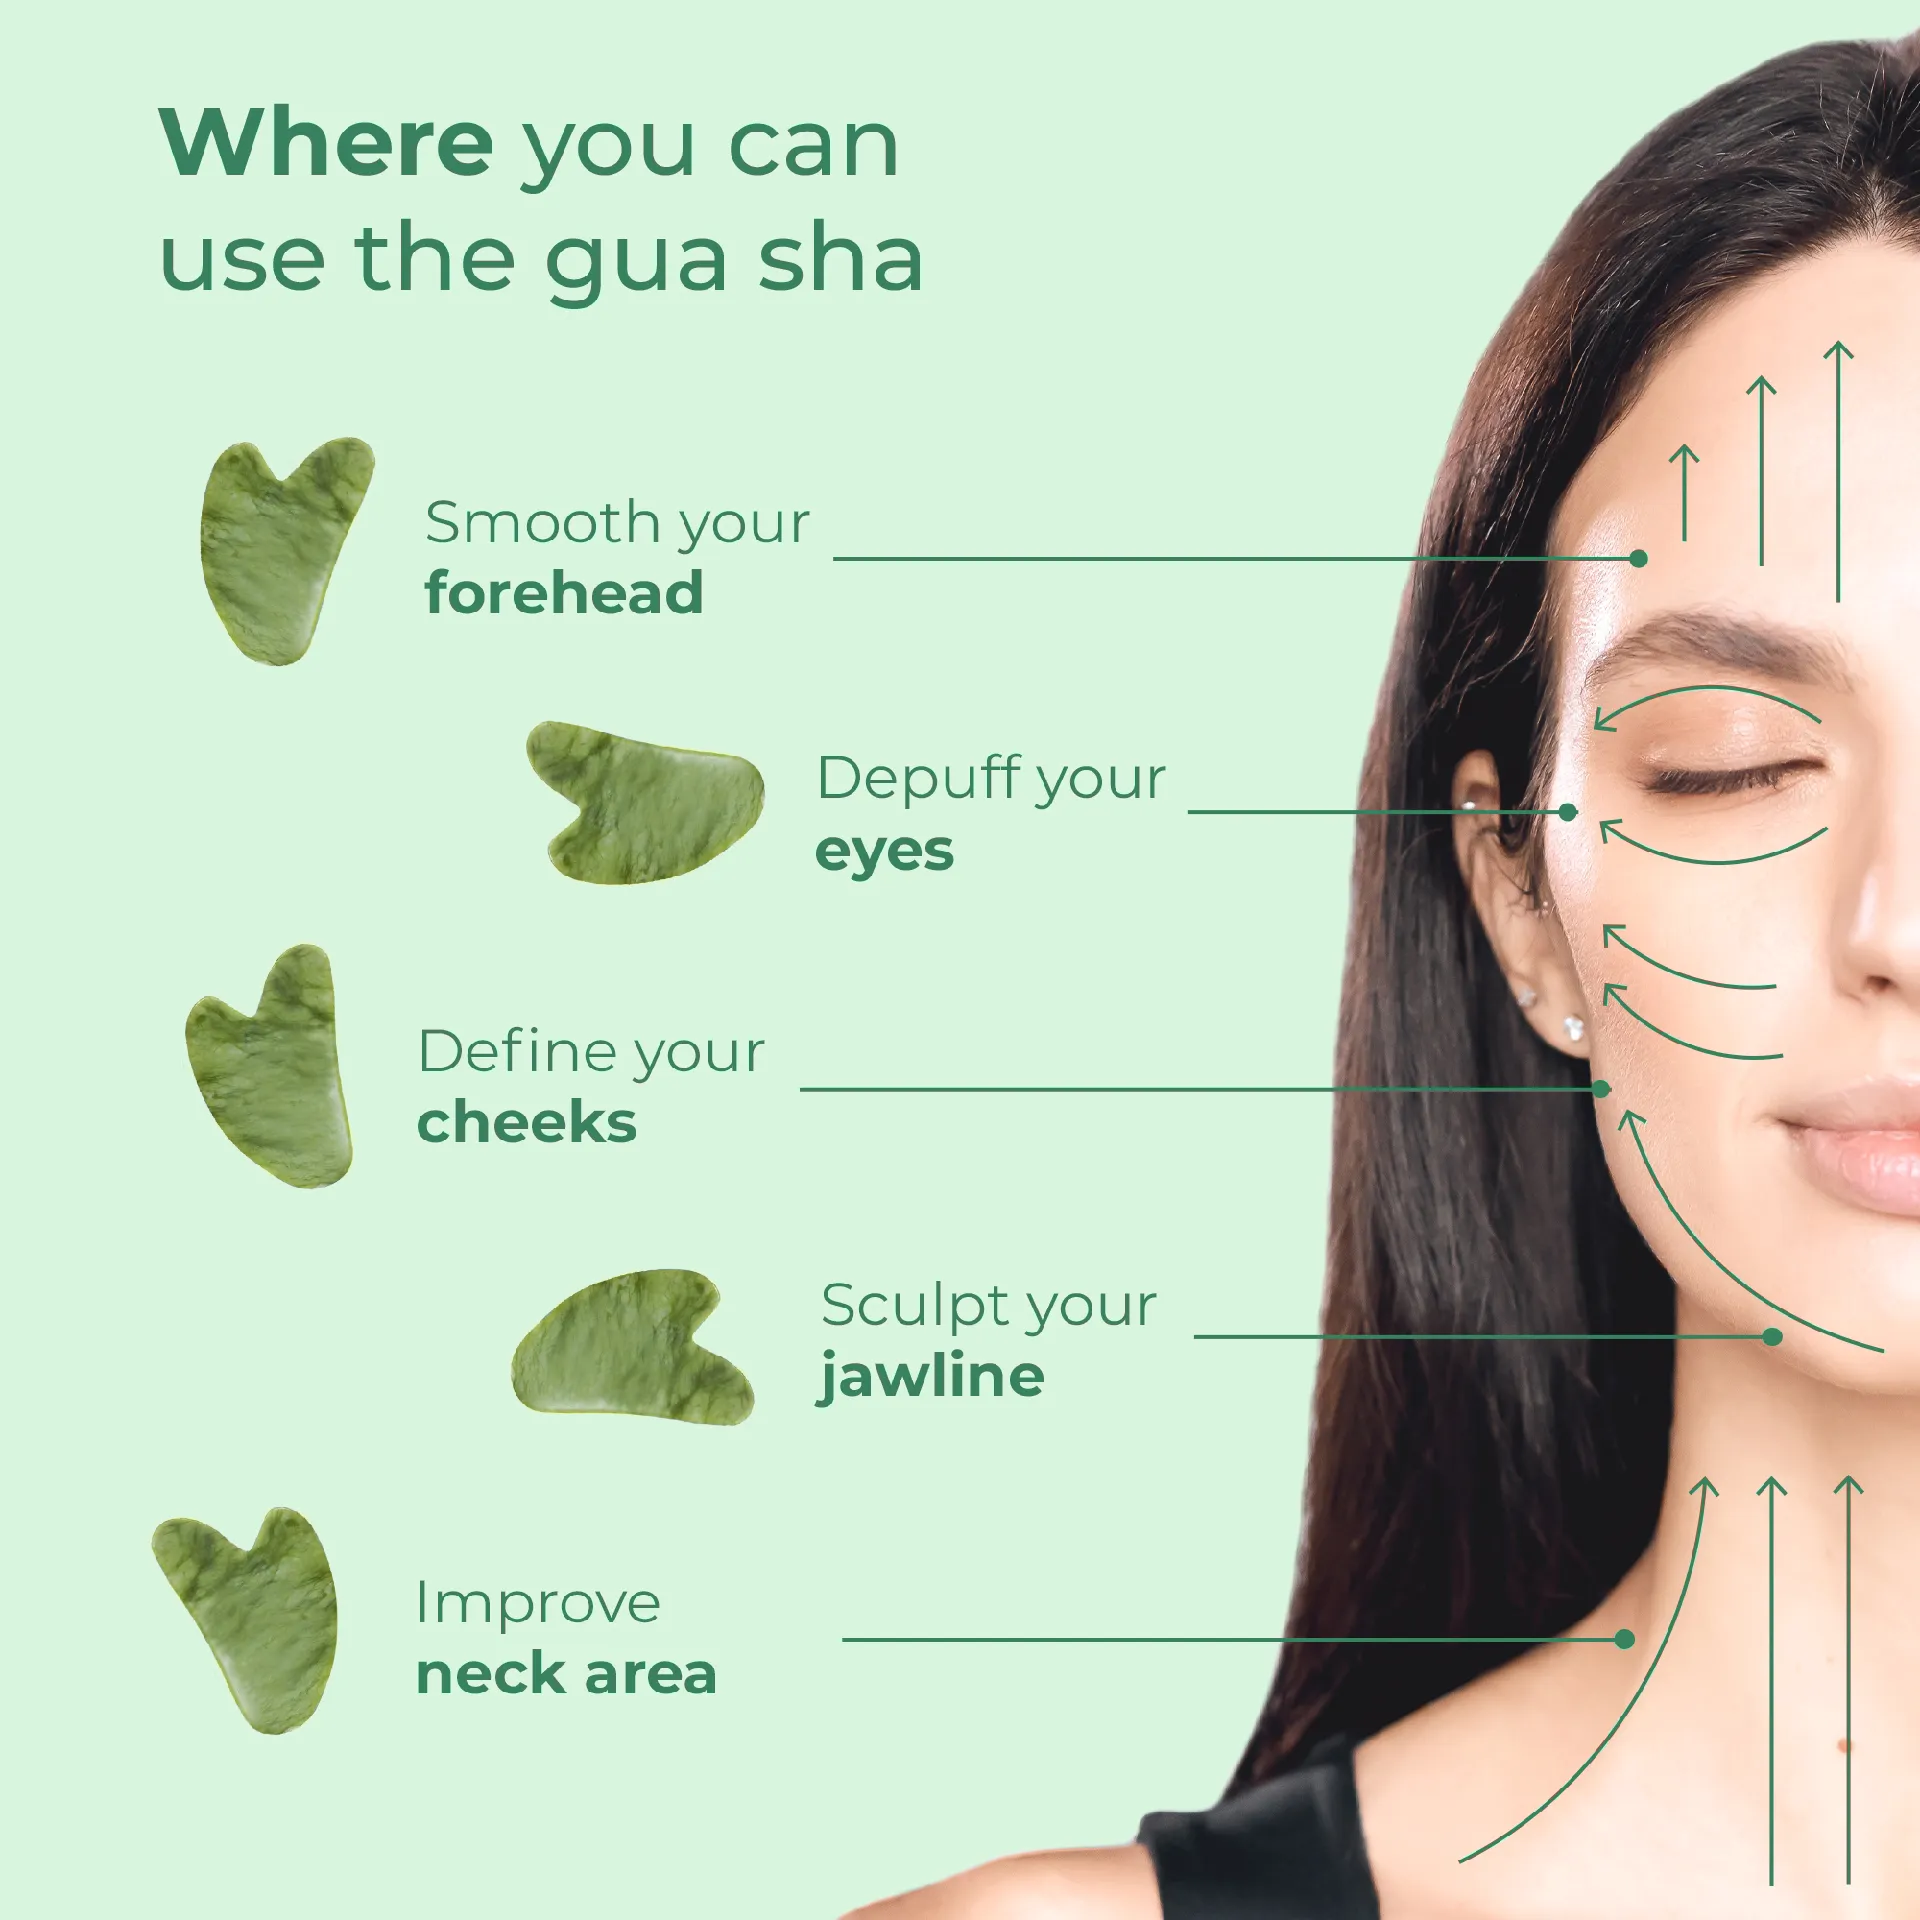 Gua Sha is great and especially for traveling. I know on trips my